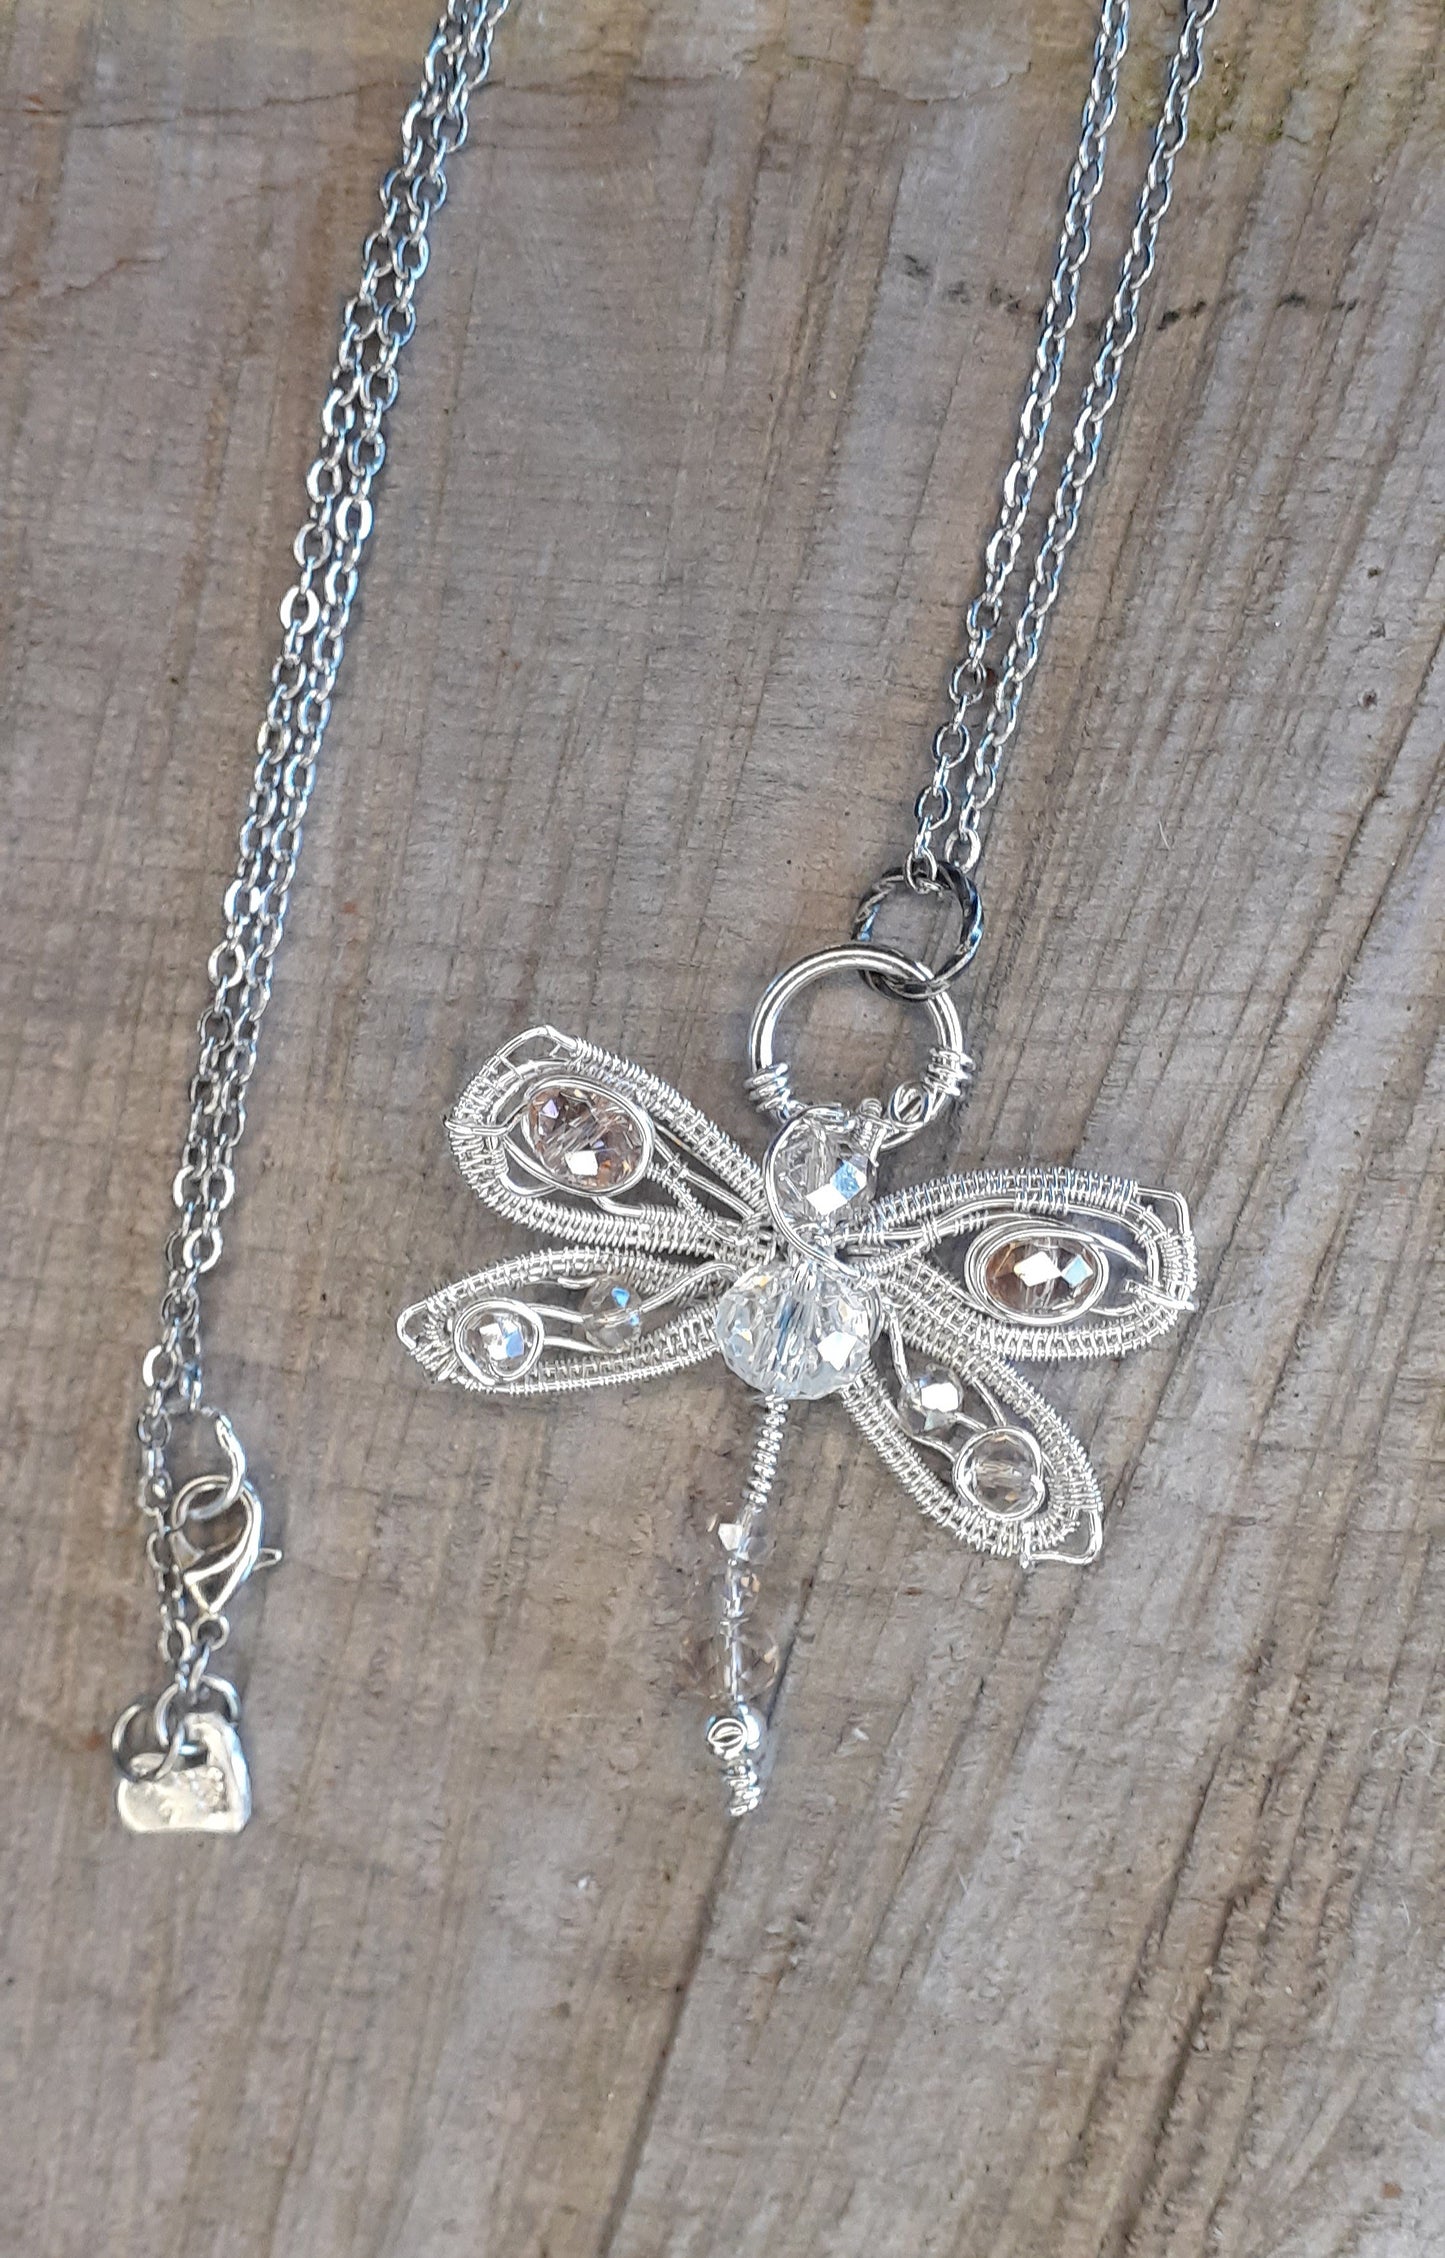 Woven Dragonfly Necklace Copper, Silver |WRD - WarmRainyDay